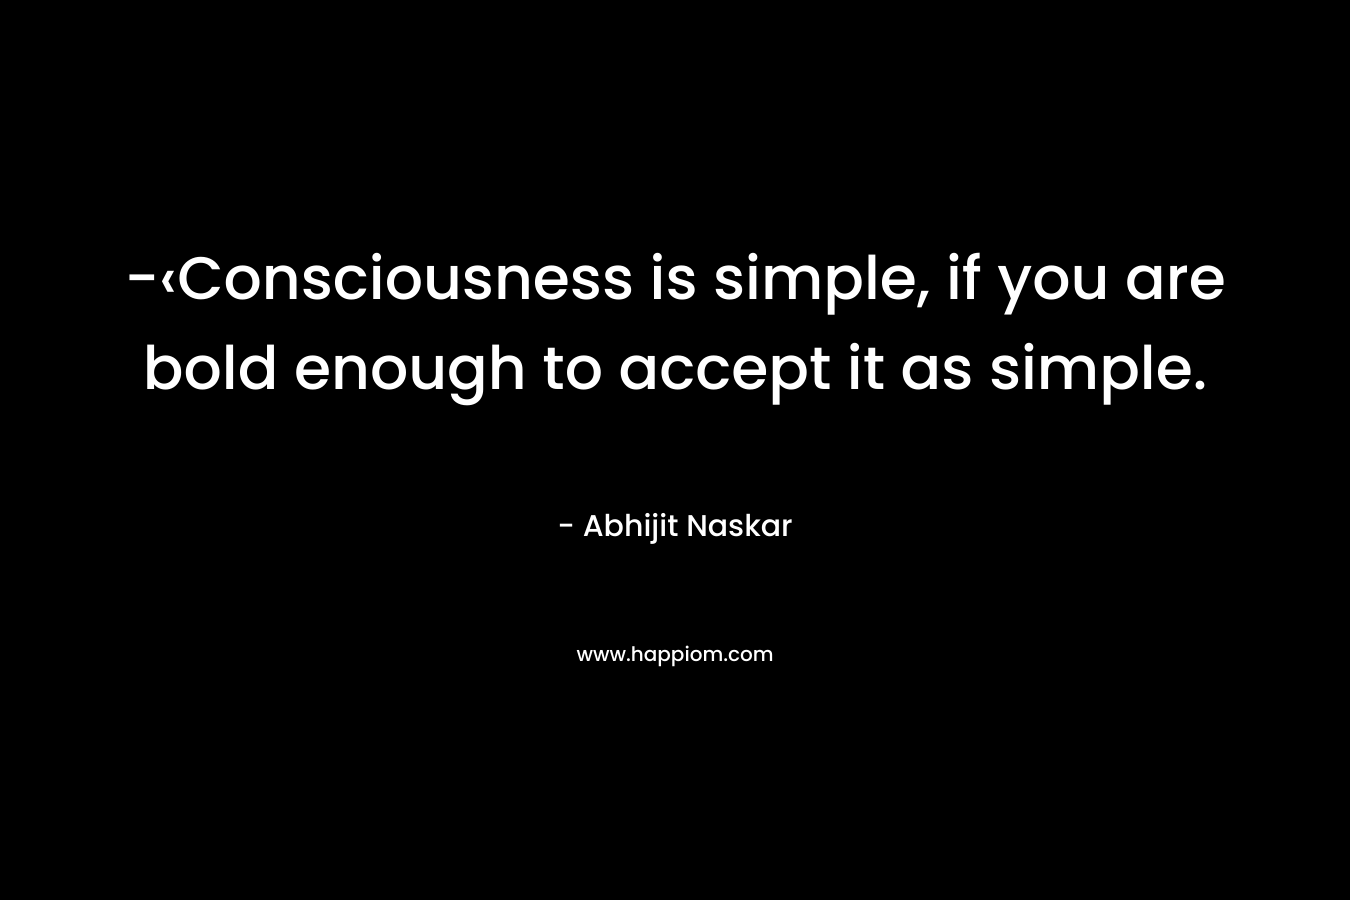 -‹Consciousness is simple, if you are bold enough to accept it as simple.